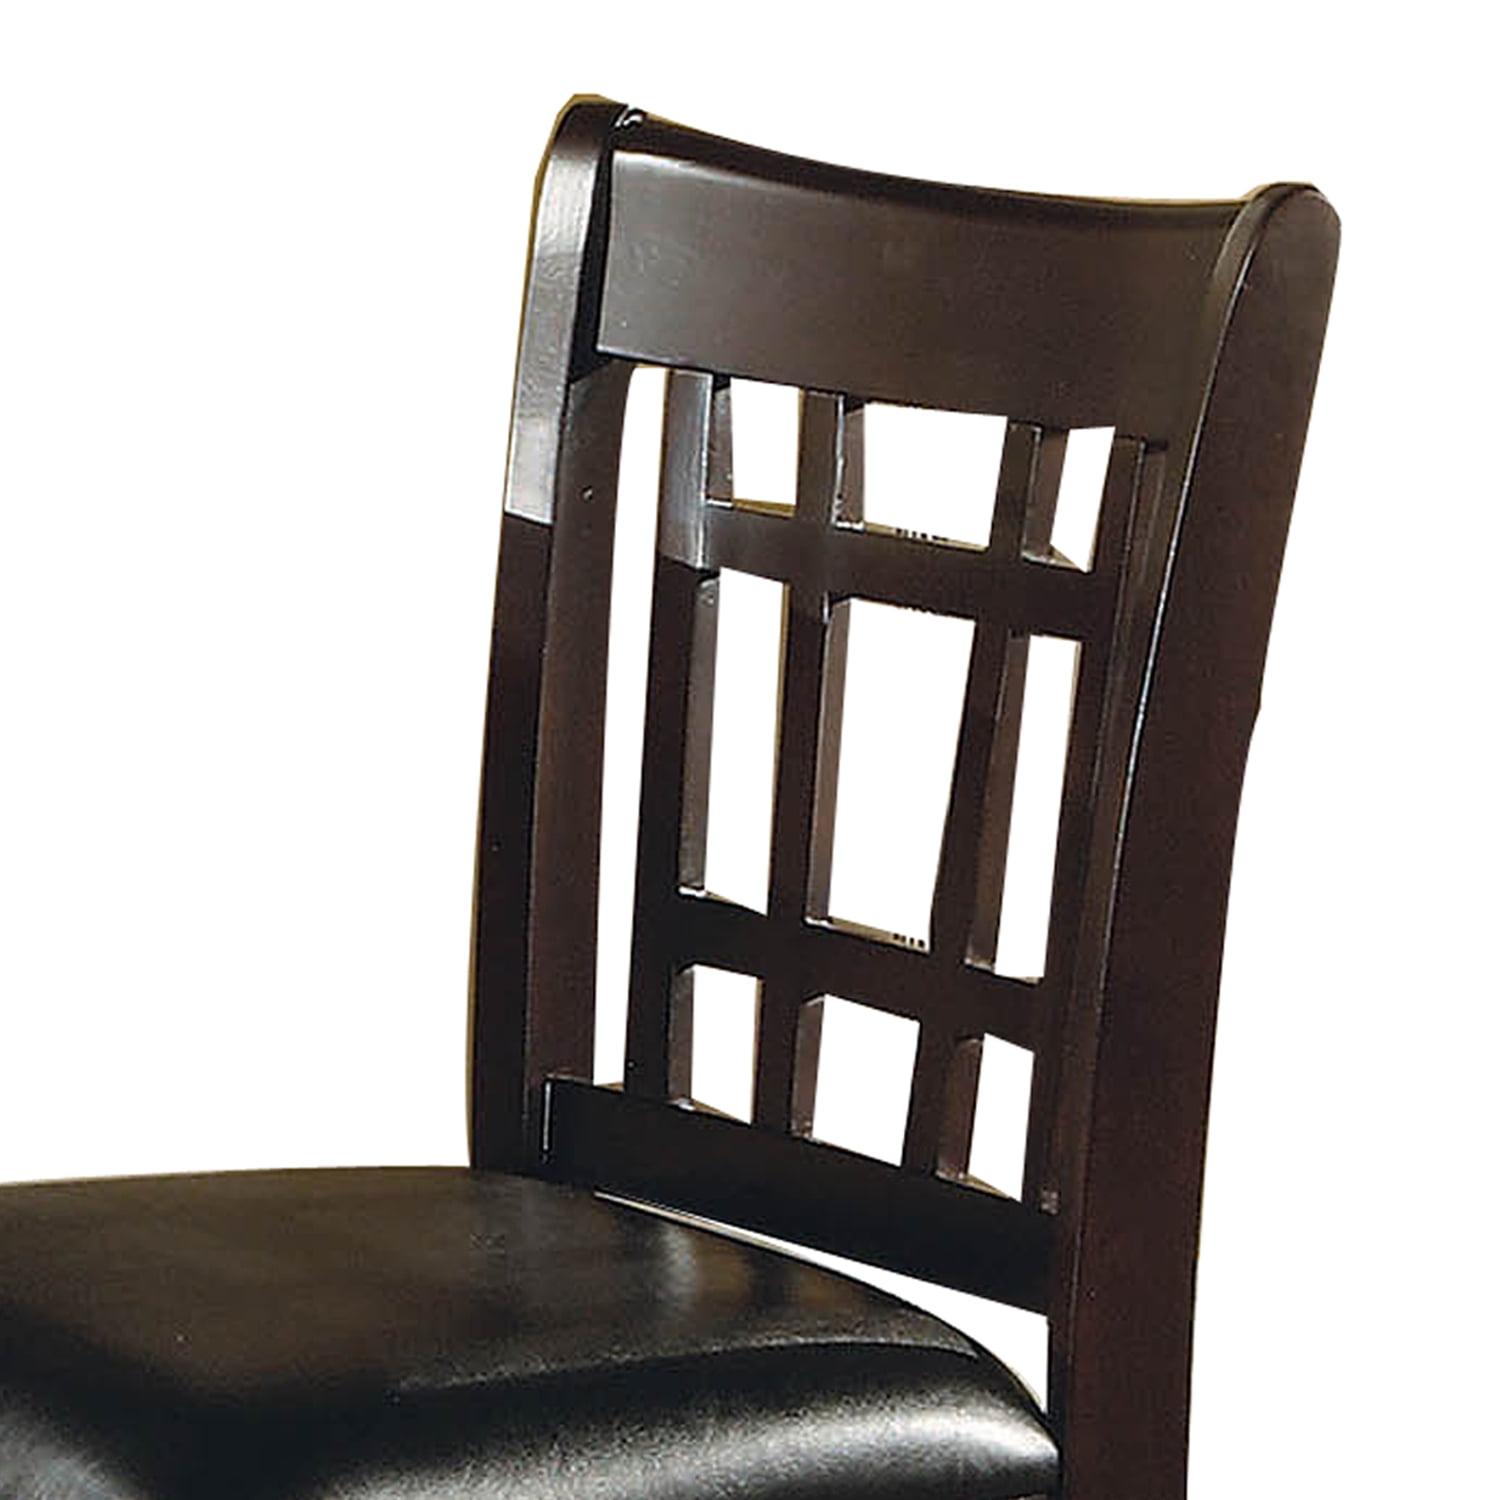 Lattice-Inspired 24" Counter Height Chair with Leatherette Seat in Brown and Black